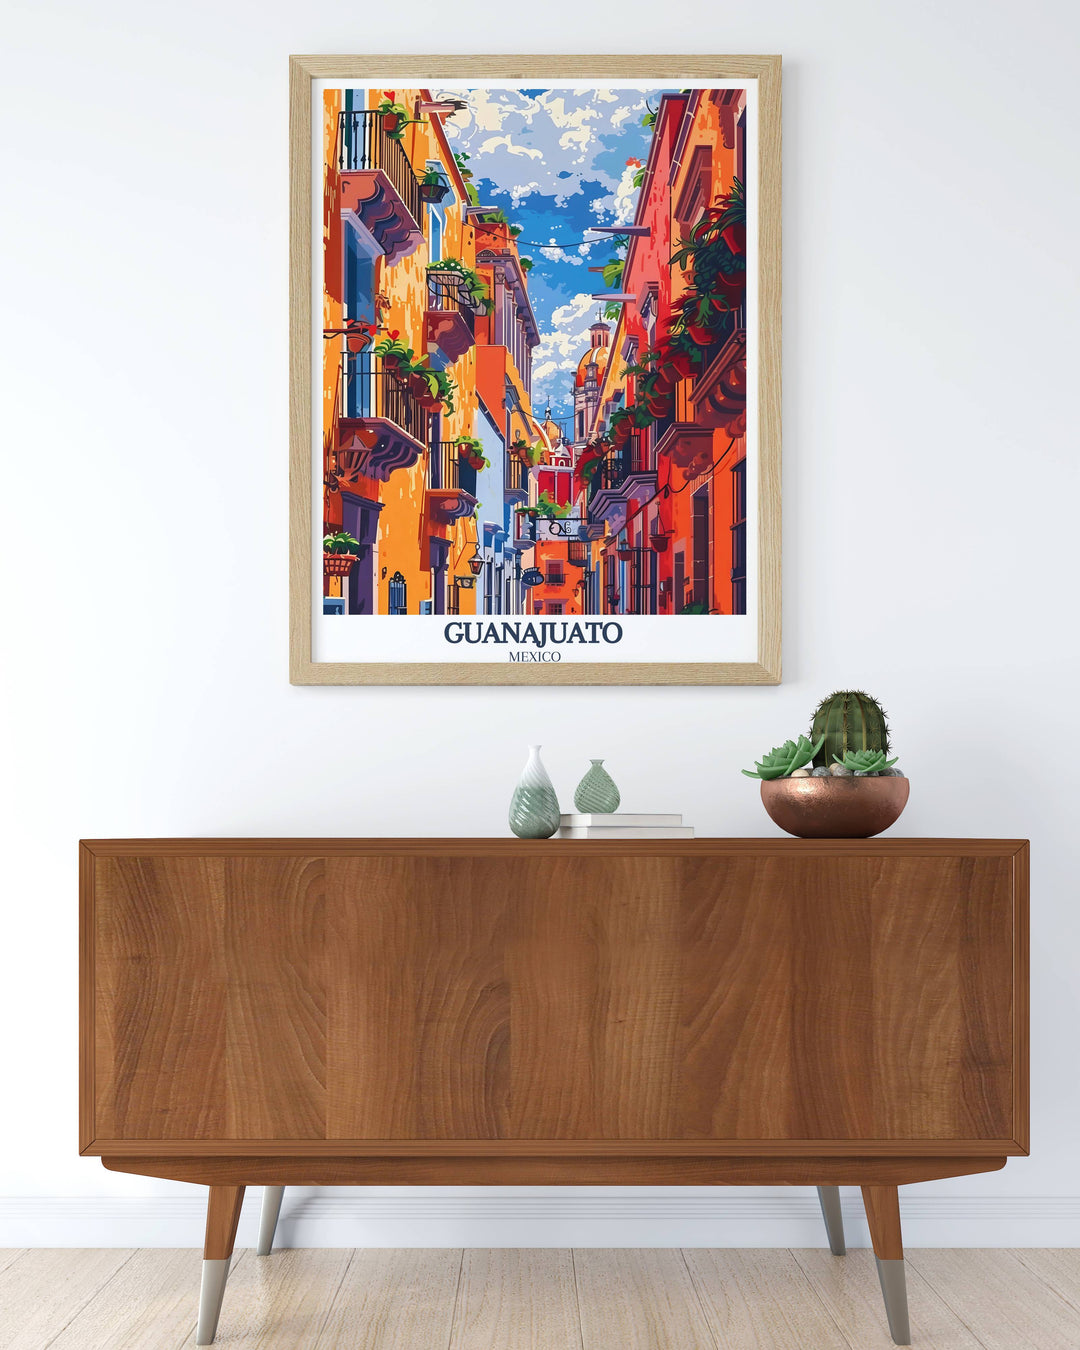 Captivating Guanajuato décor piece illustrating the bustling market streets, filled with vibrant colors and the spirit of Mexico.